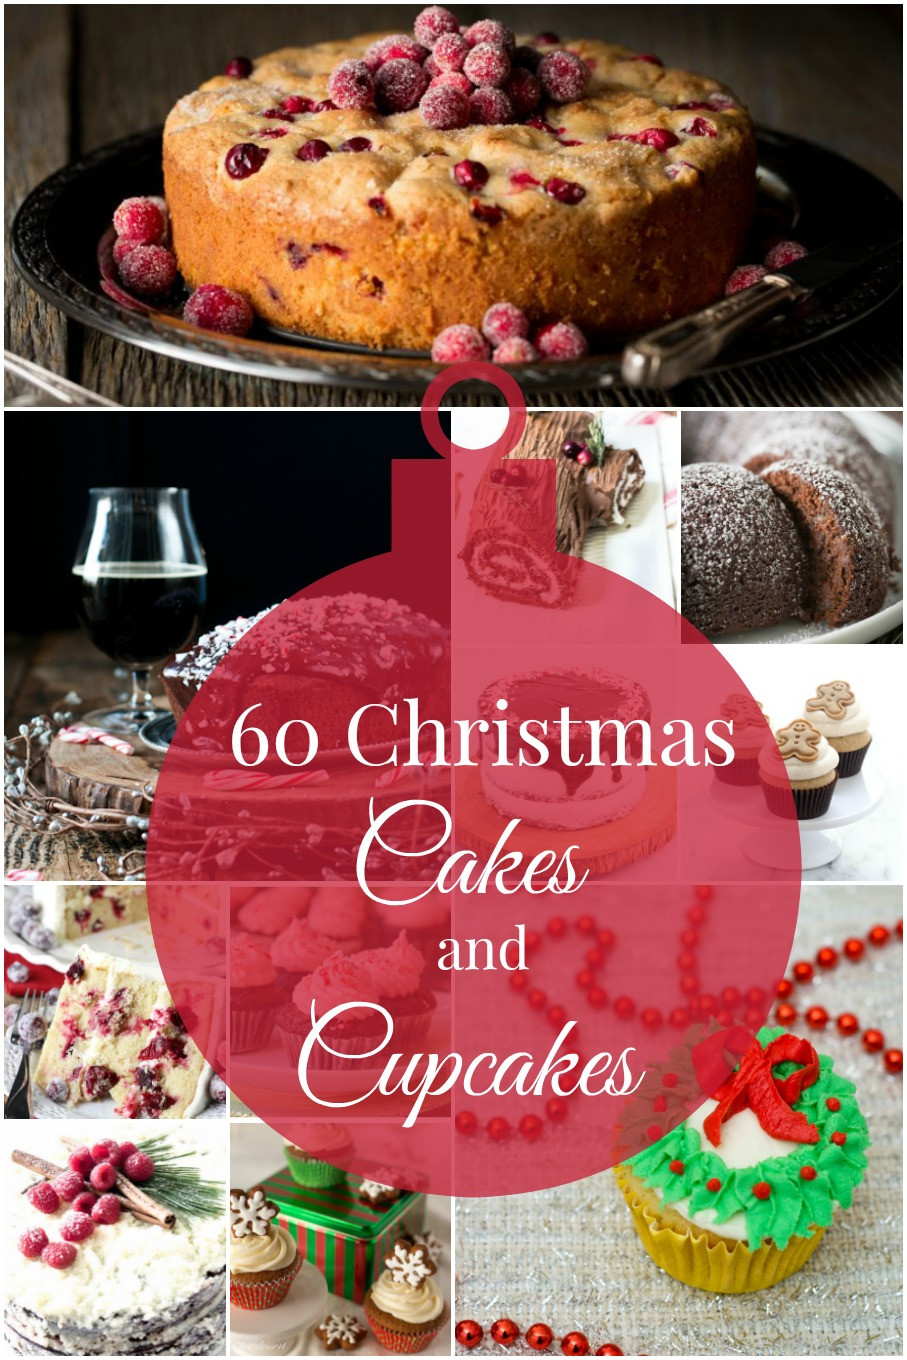 Christmas Cakes Flavors
 60 Christmas Cakes and Cupcakes Roundup by The Redhead Baker